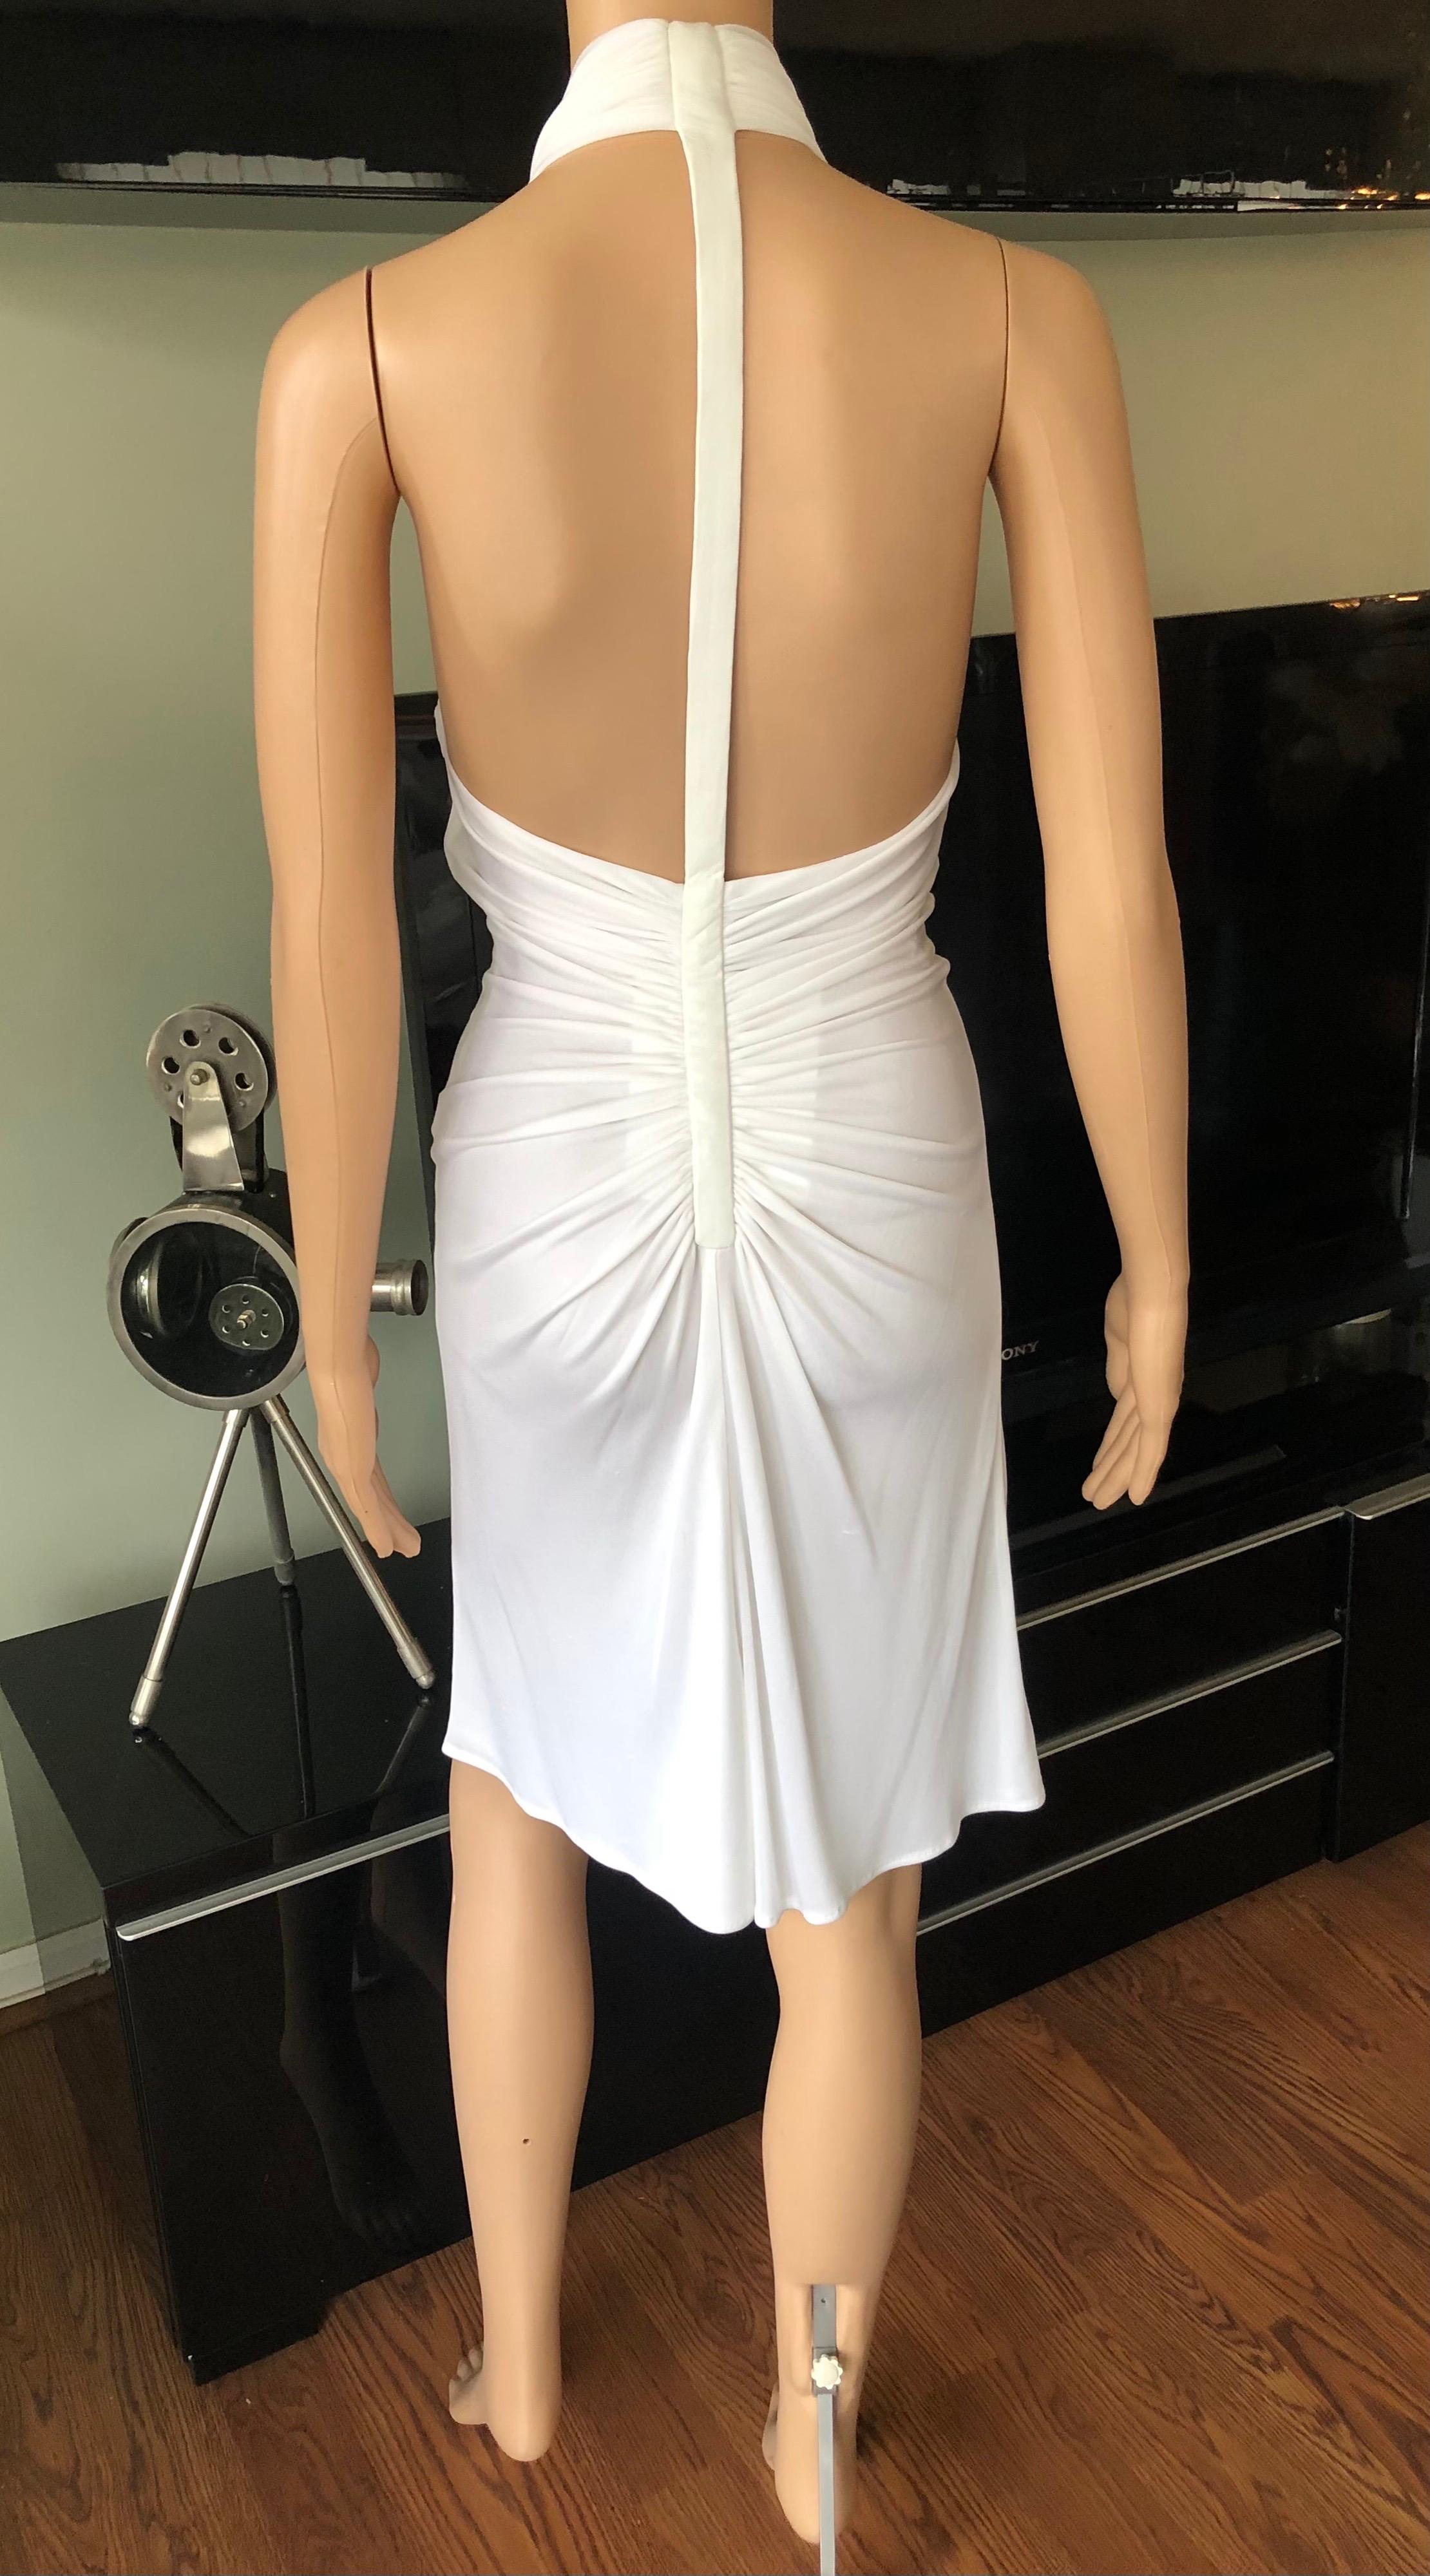 Gray Gianni Versace S/S 2001 Runway Vintage Backless Plunged White Dress